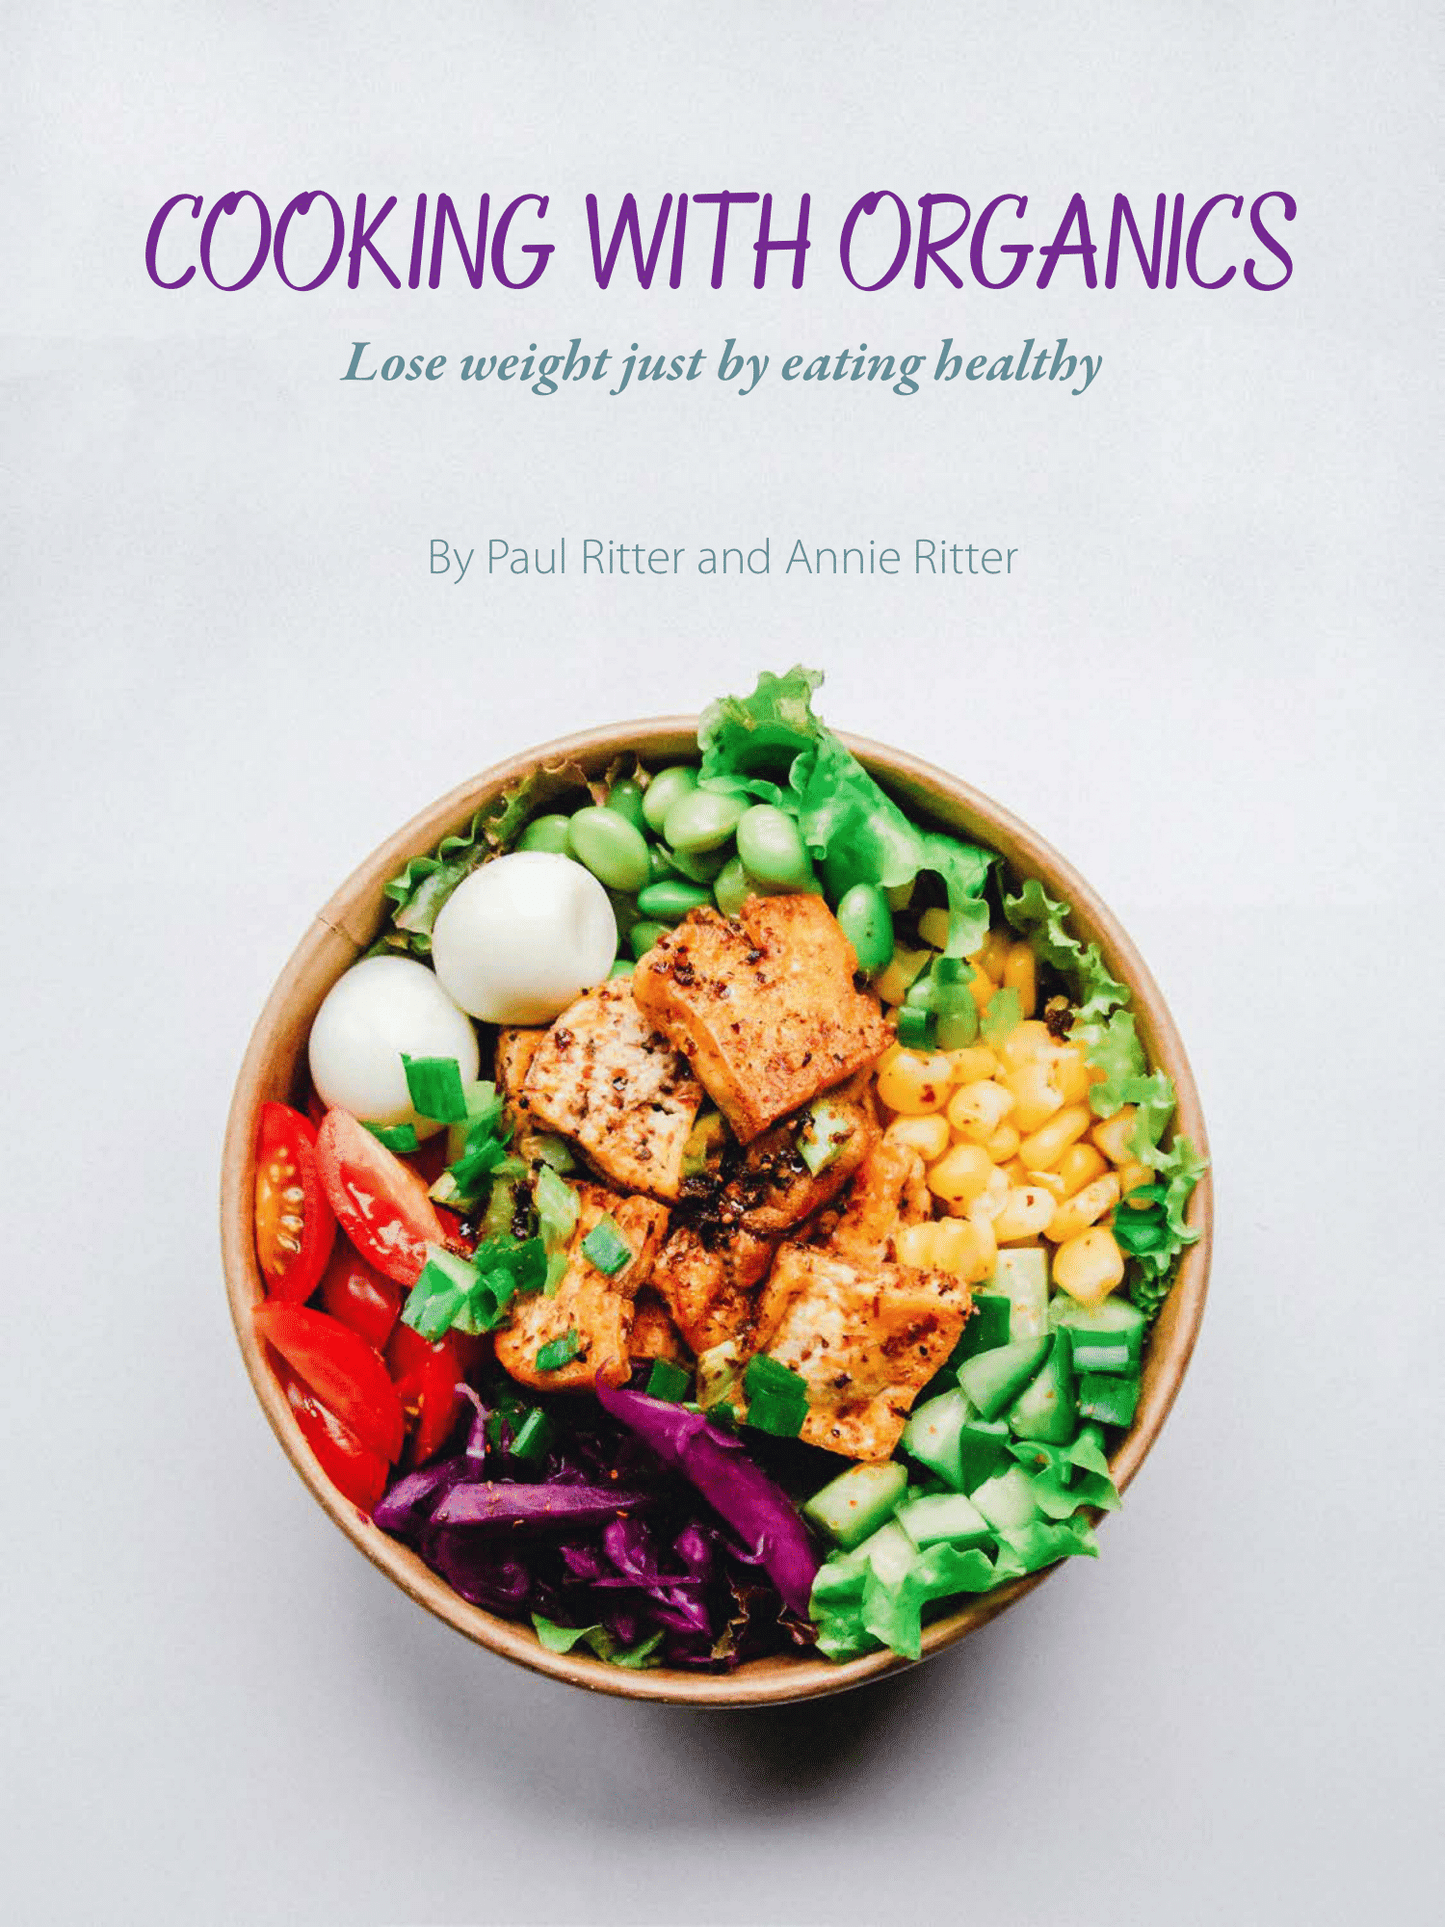 Cooking With Organics by Paul Ritter & Annie Ritter